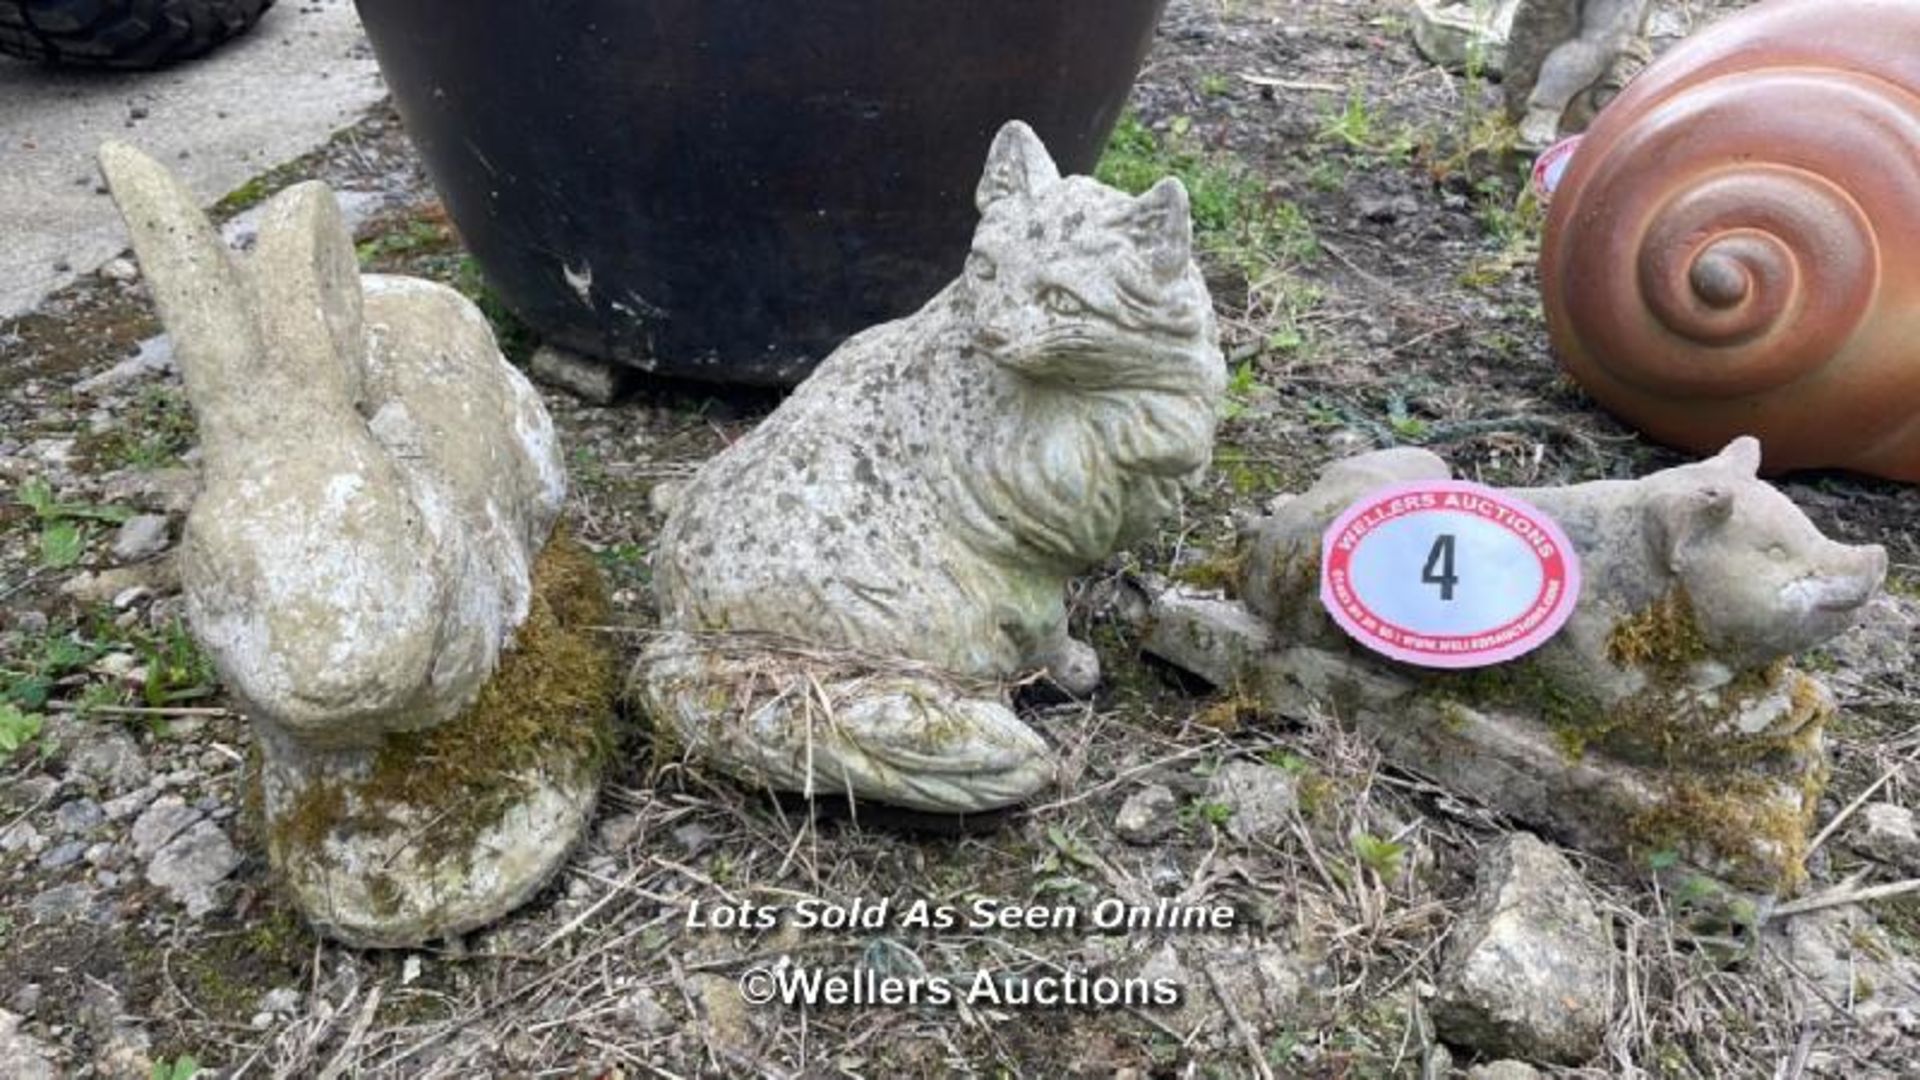 *THREE RECONSTITUTED STONE ORNAMENTS, CAT, RABBIT AND A PIG, LARGEST 26CM (H) X 28CM (L) /